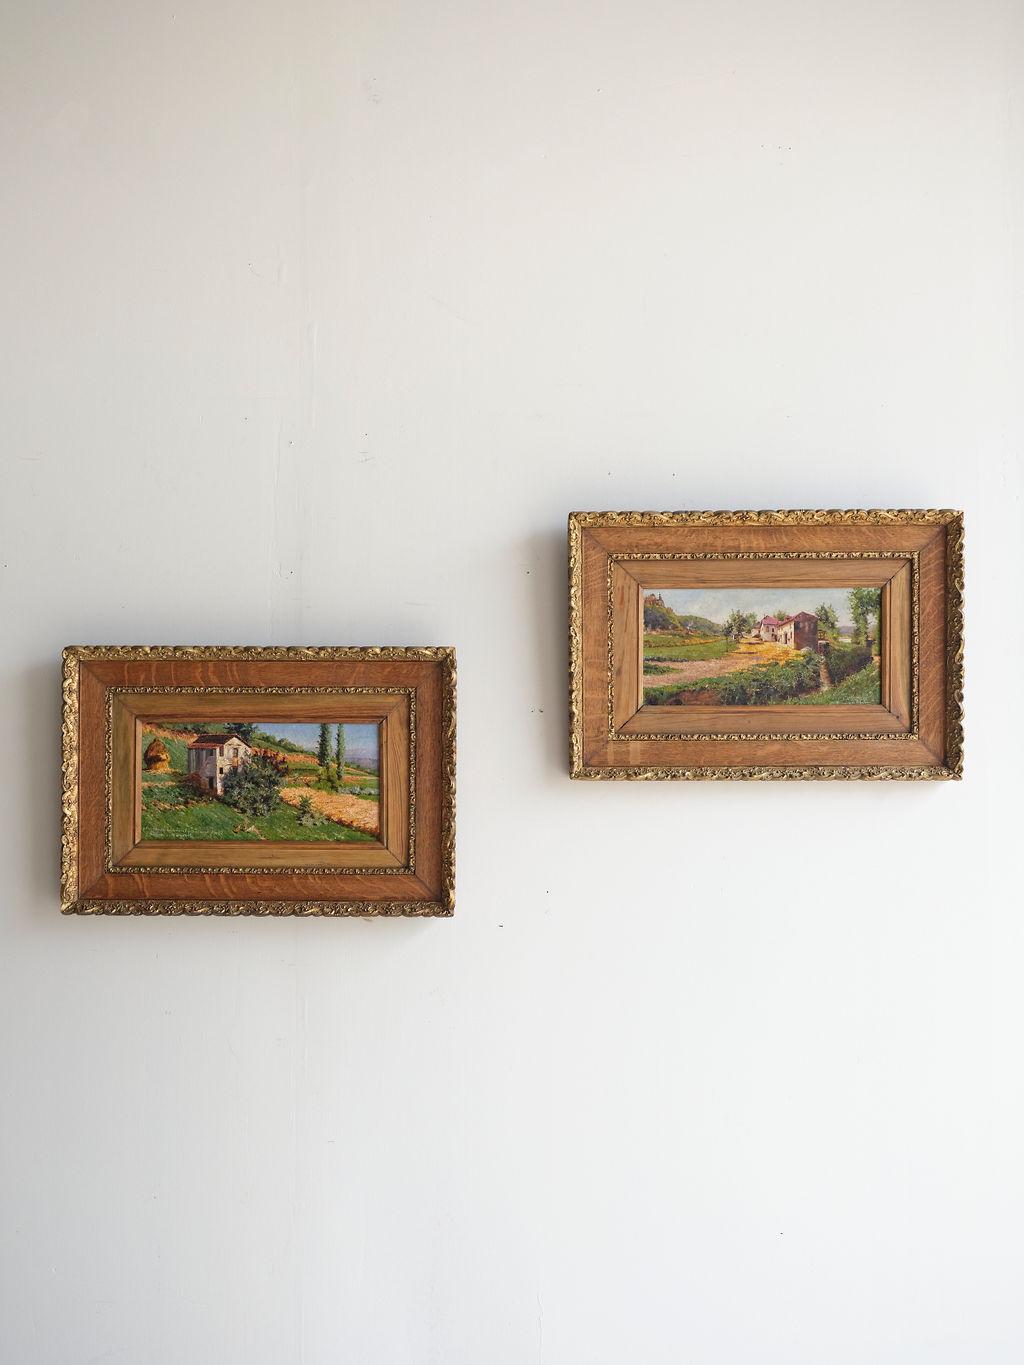 This pair of early 20th century oil paintings by Alfred Blondear are truly stunning. They feature the English countryside landscape. The homes/farms are a tan/cream color with red roofing. These oil paintings are in their original frames. They are